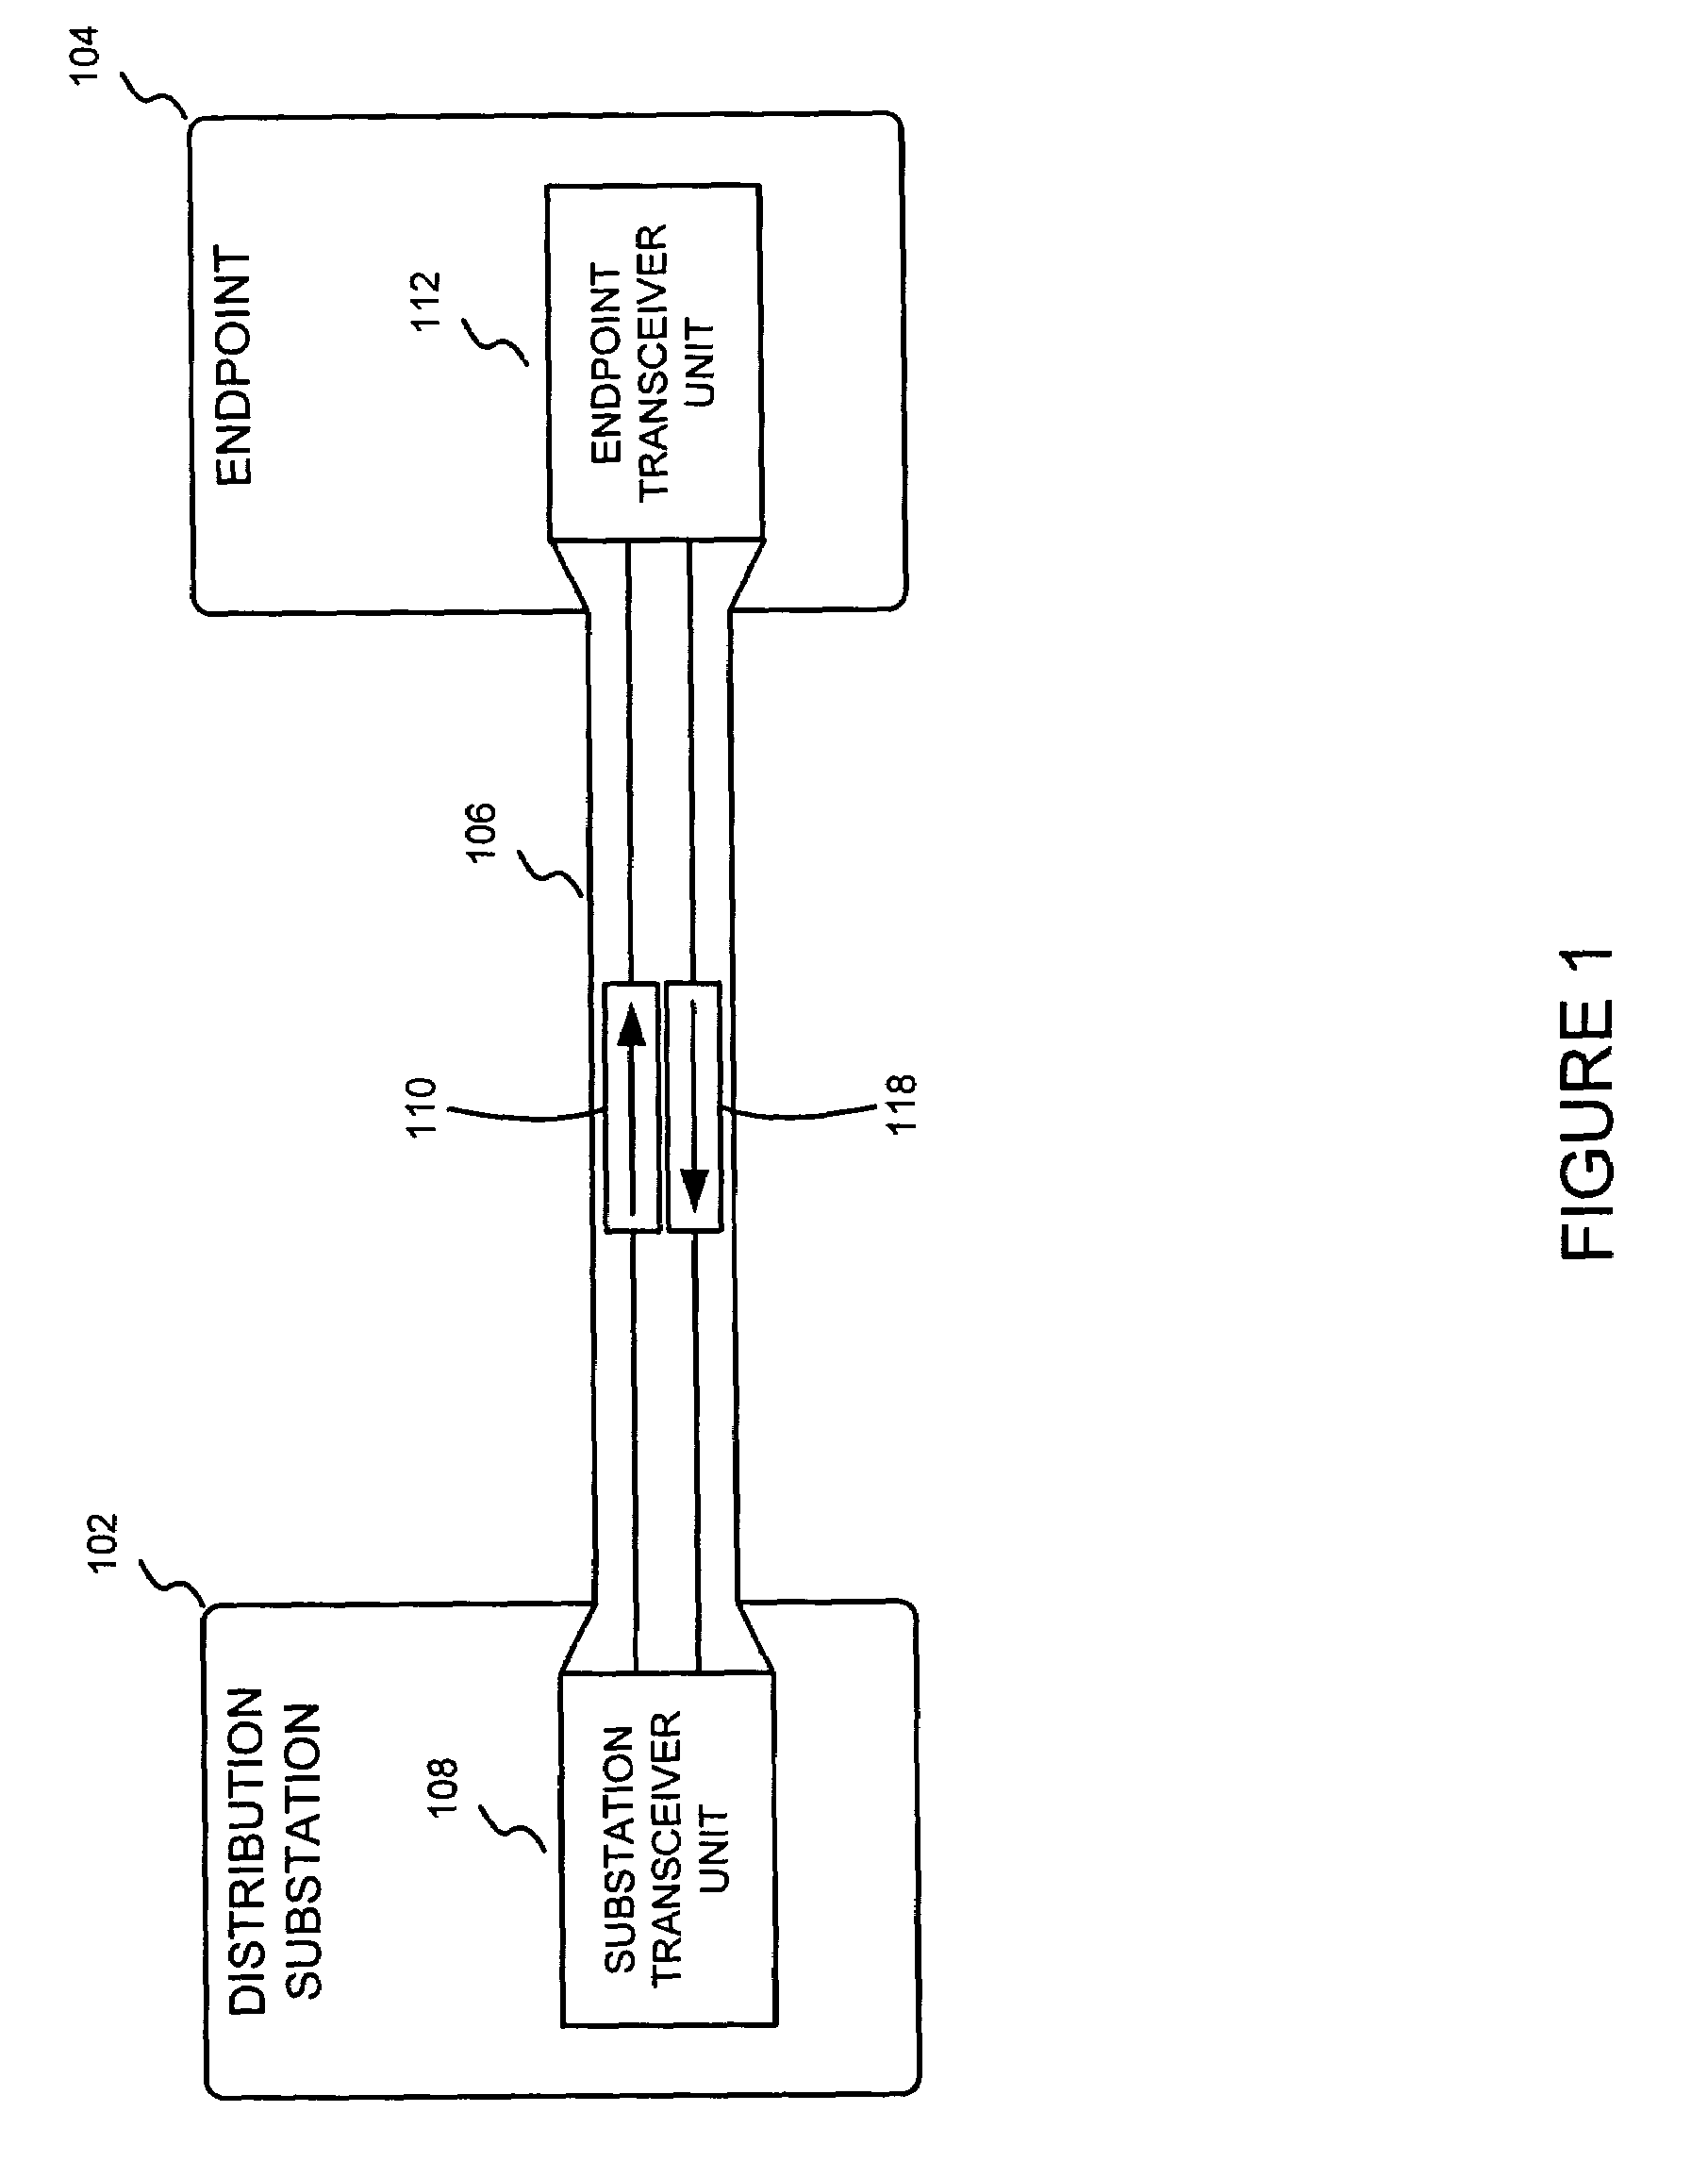 Endpoint event processing system